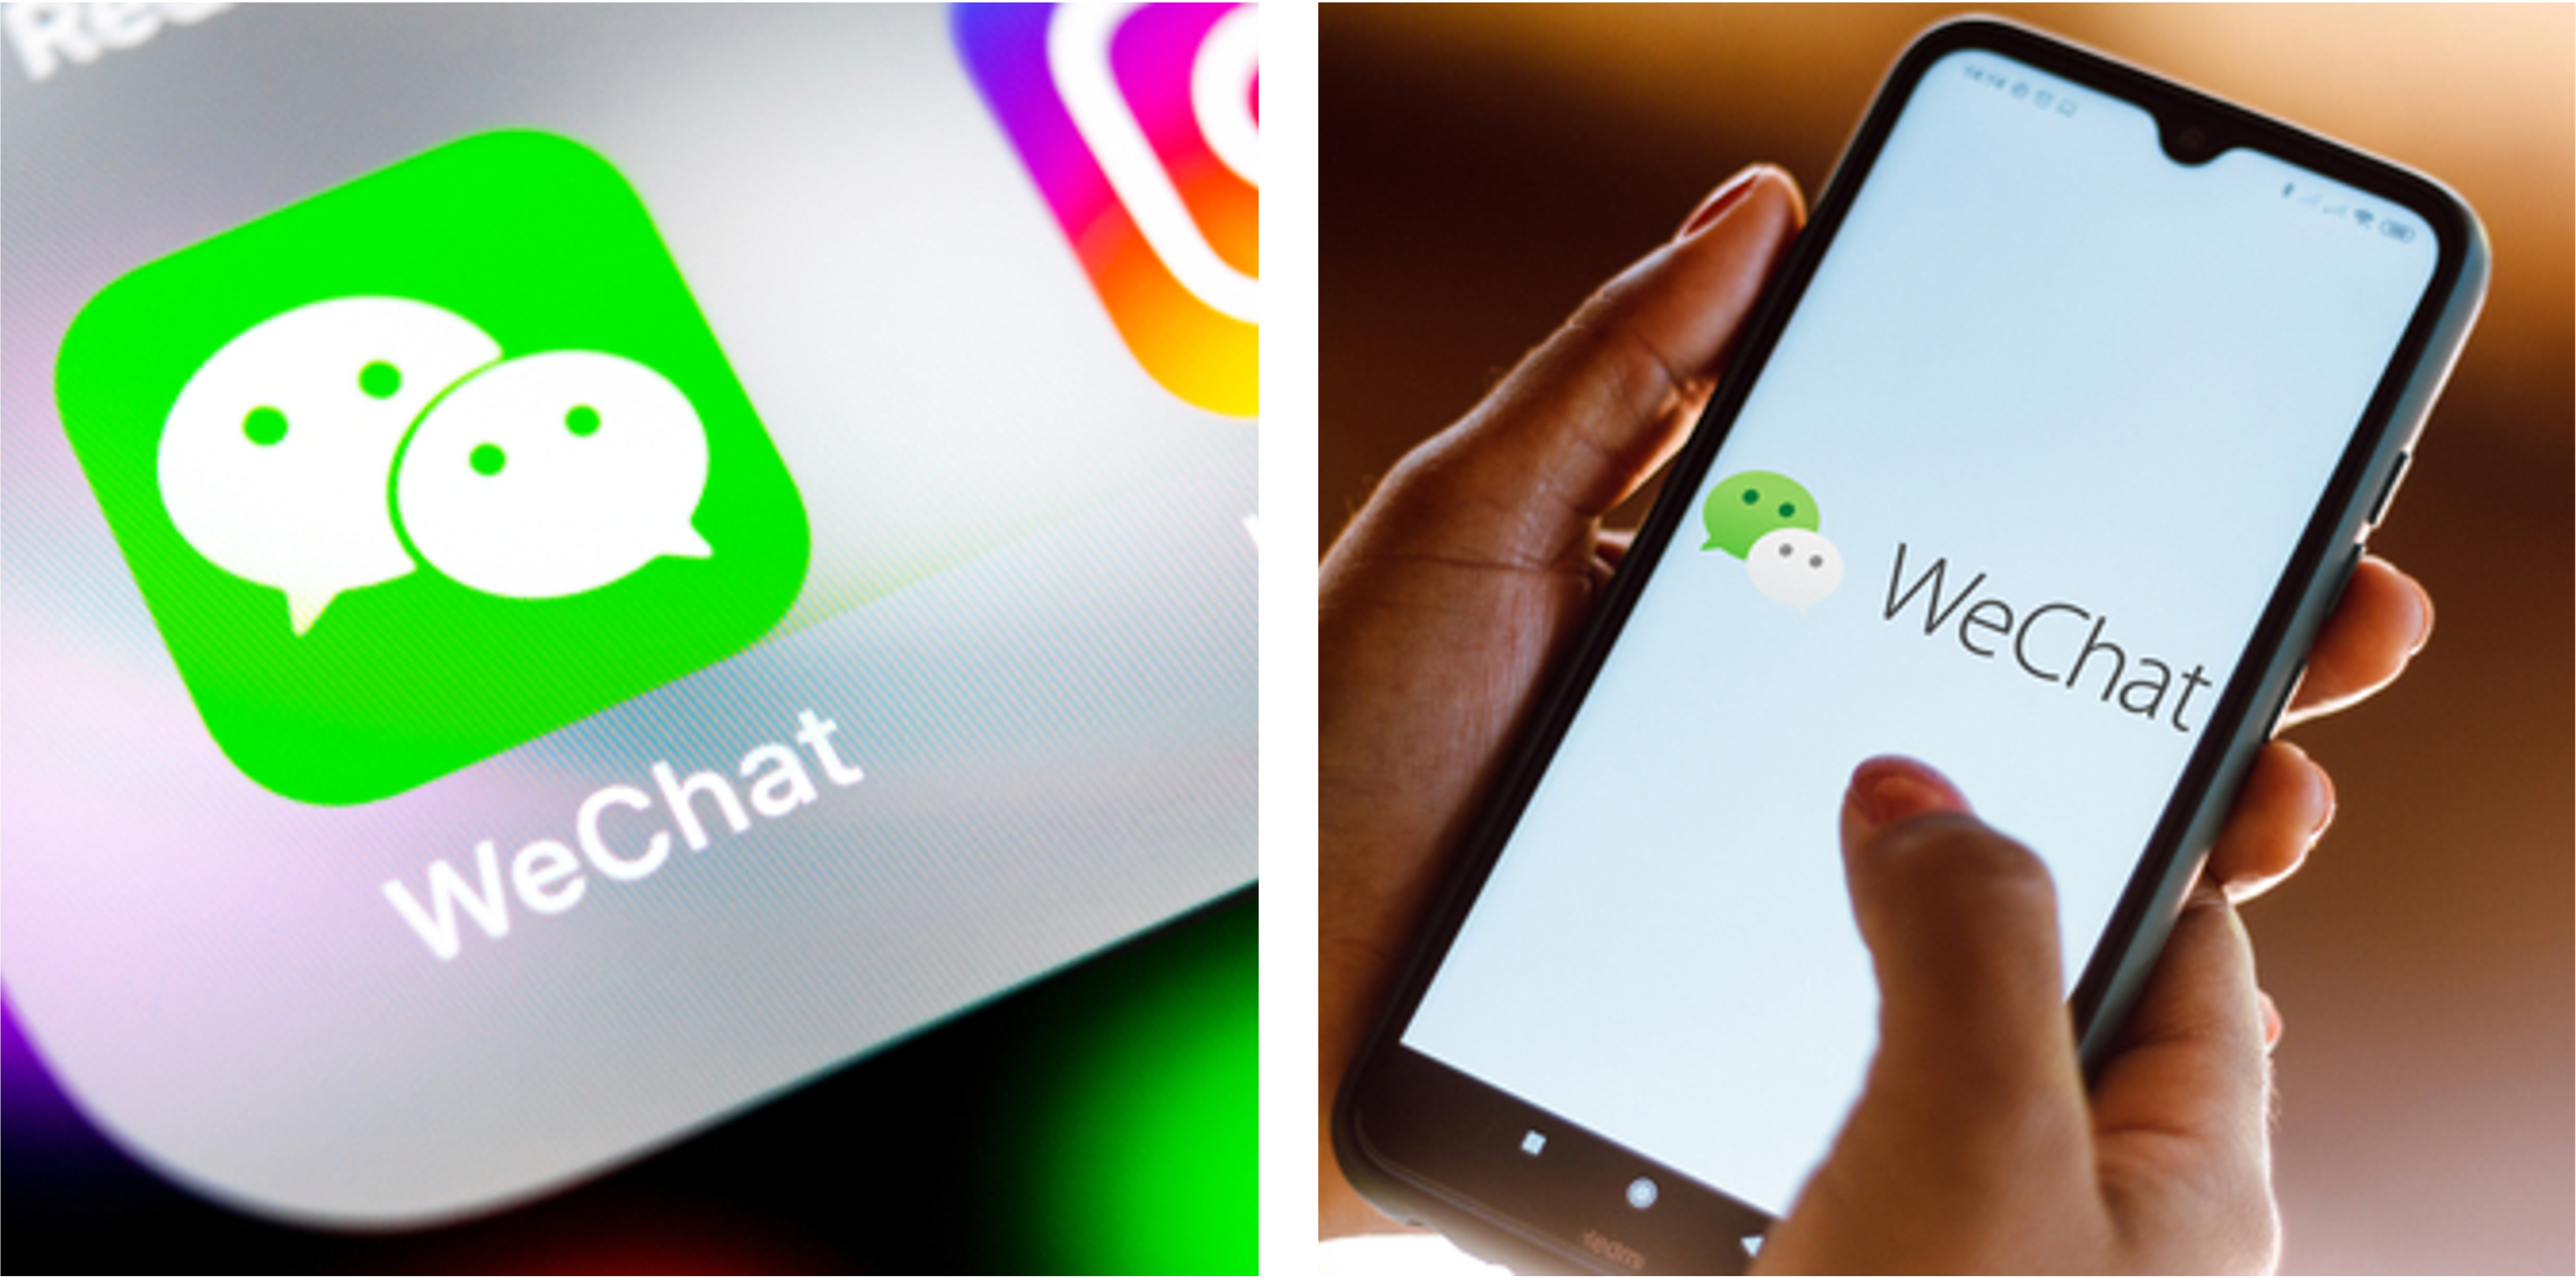 social media platforms & APPs in China: WeChat